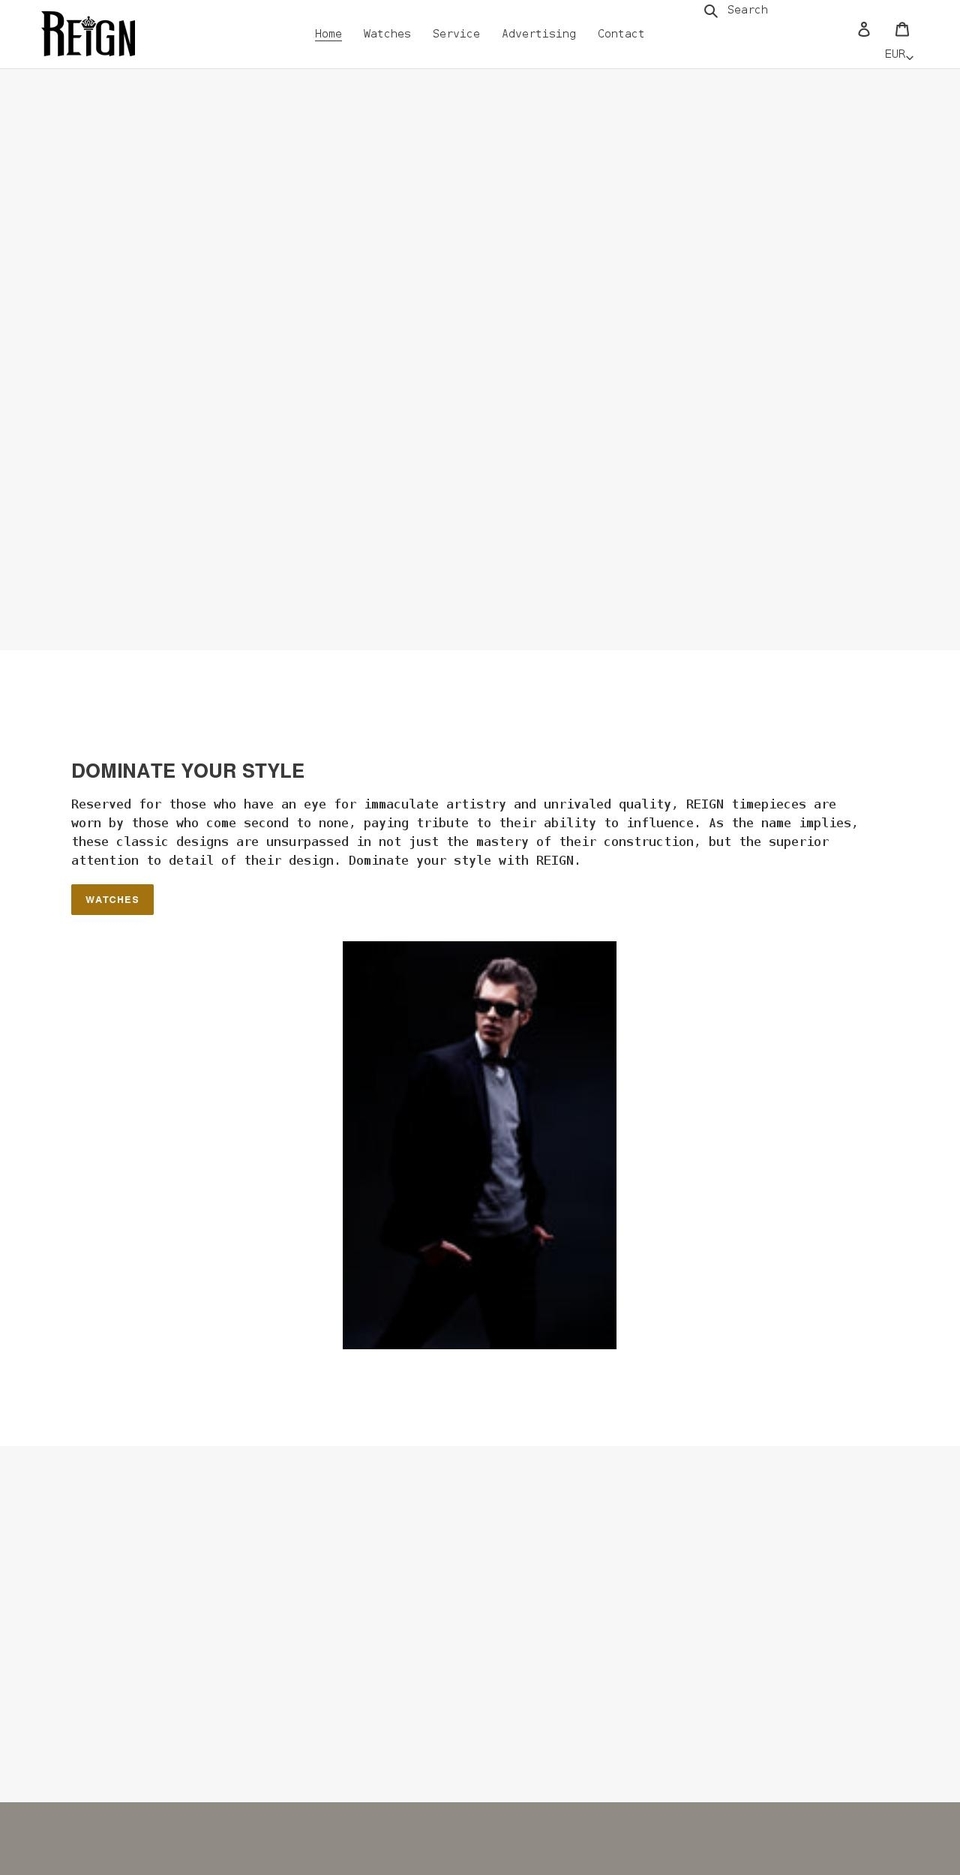 WATCHES Shopify theme site example reignwatches.com